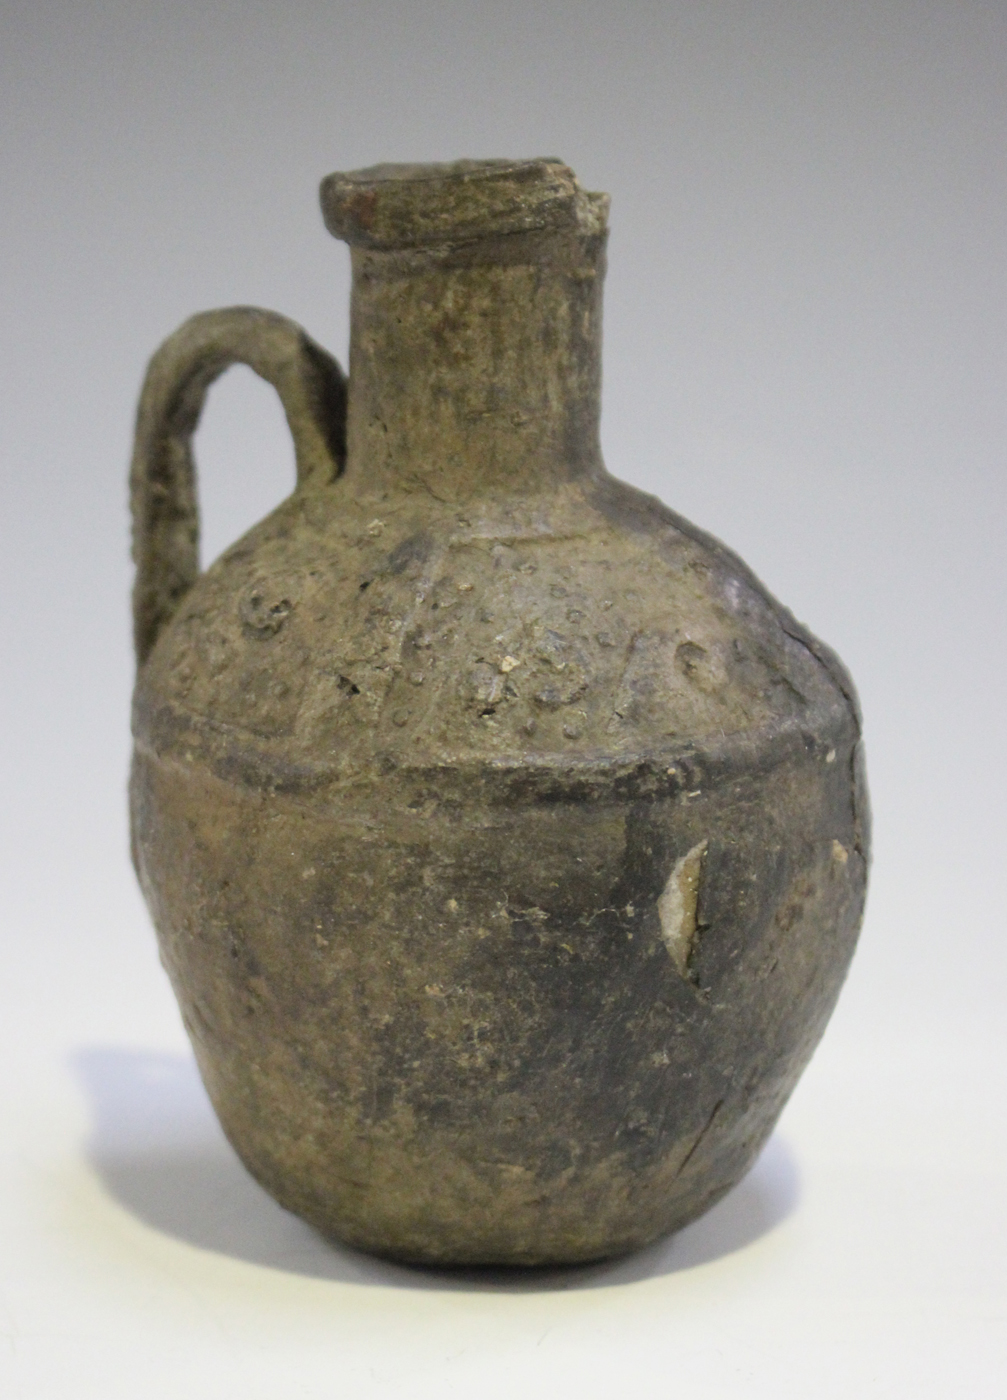 An Ancient Etruscan Bucchero ware oil jug, approx 6th century BC, the body with a loop handle, the - Image 2 of 2